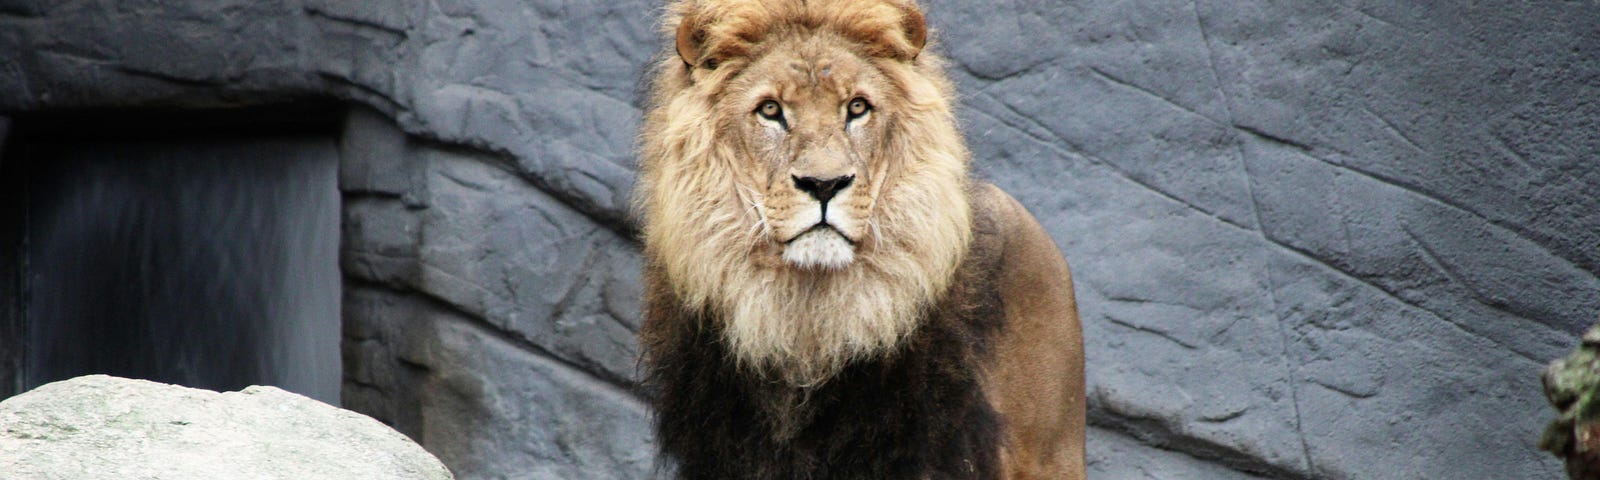 A lion stands in a zoo enclosure, an expression of puzzlement or resignation on its face